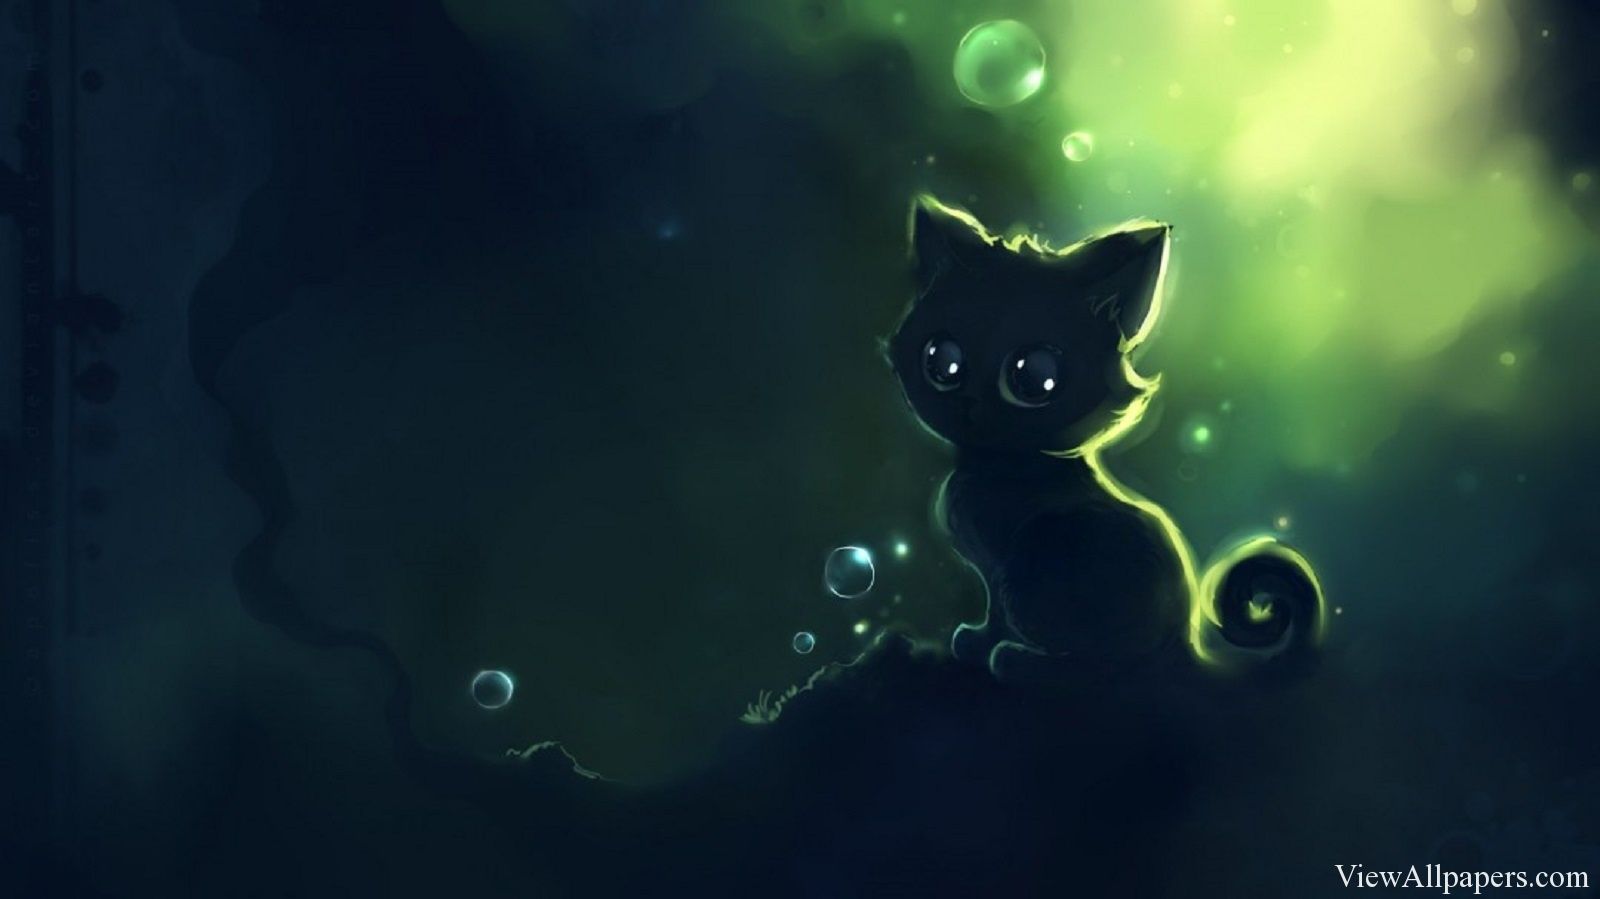 Free download Anime Alone Cat Wallpaper For PC computers desktop background [1600x899] for your Desktop, Mobile & Tablet. Explore Anime Background Wallpaperp Anime Wallpaper, Anime HD Wallpaper, Free